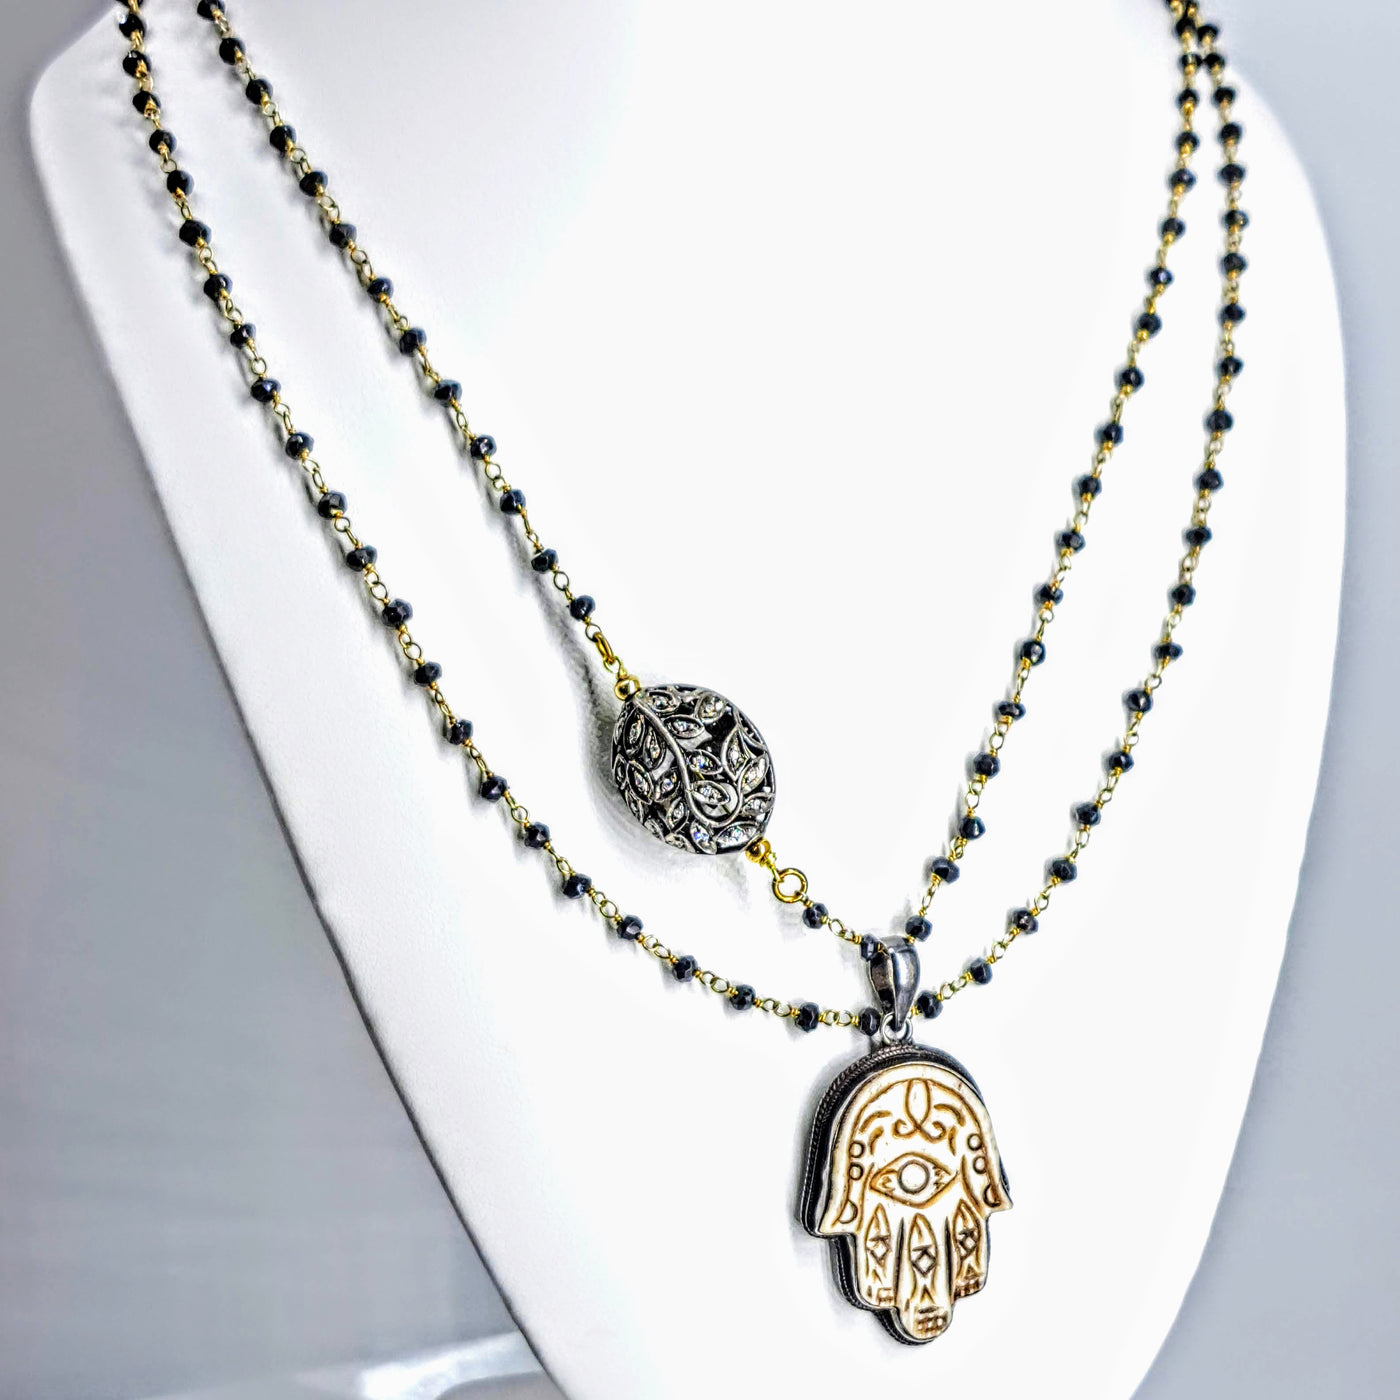 "Garden Of Life" 40" Convertible Necklace - Spinel, Bone, Diamond, Sterling, Gold Sterling